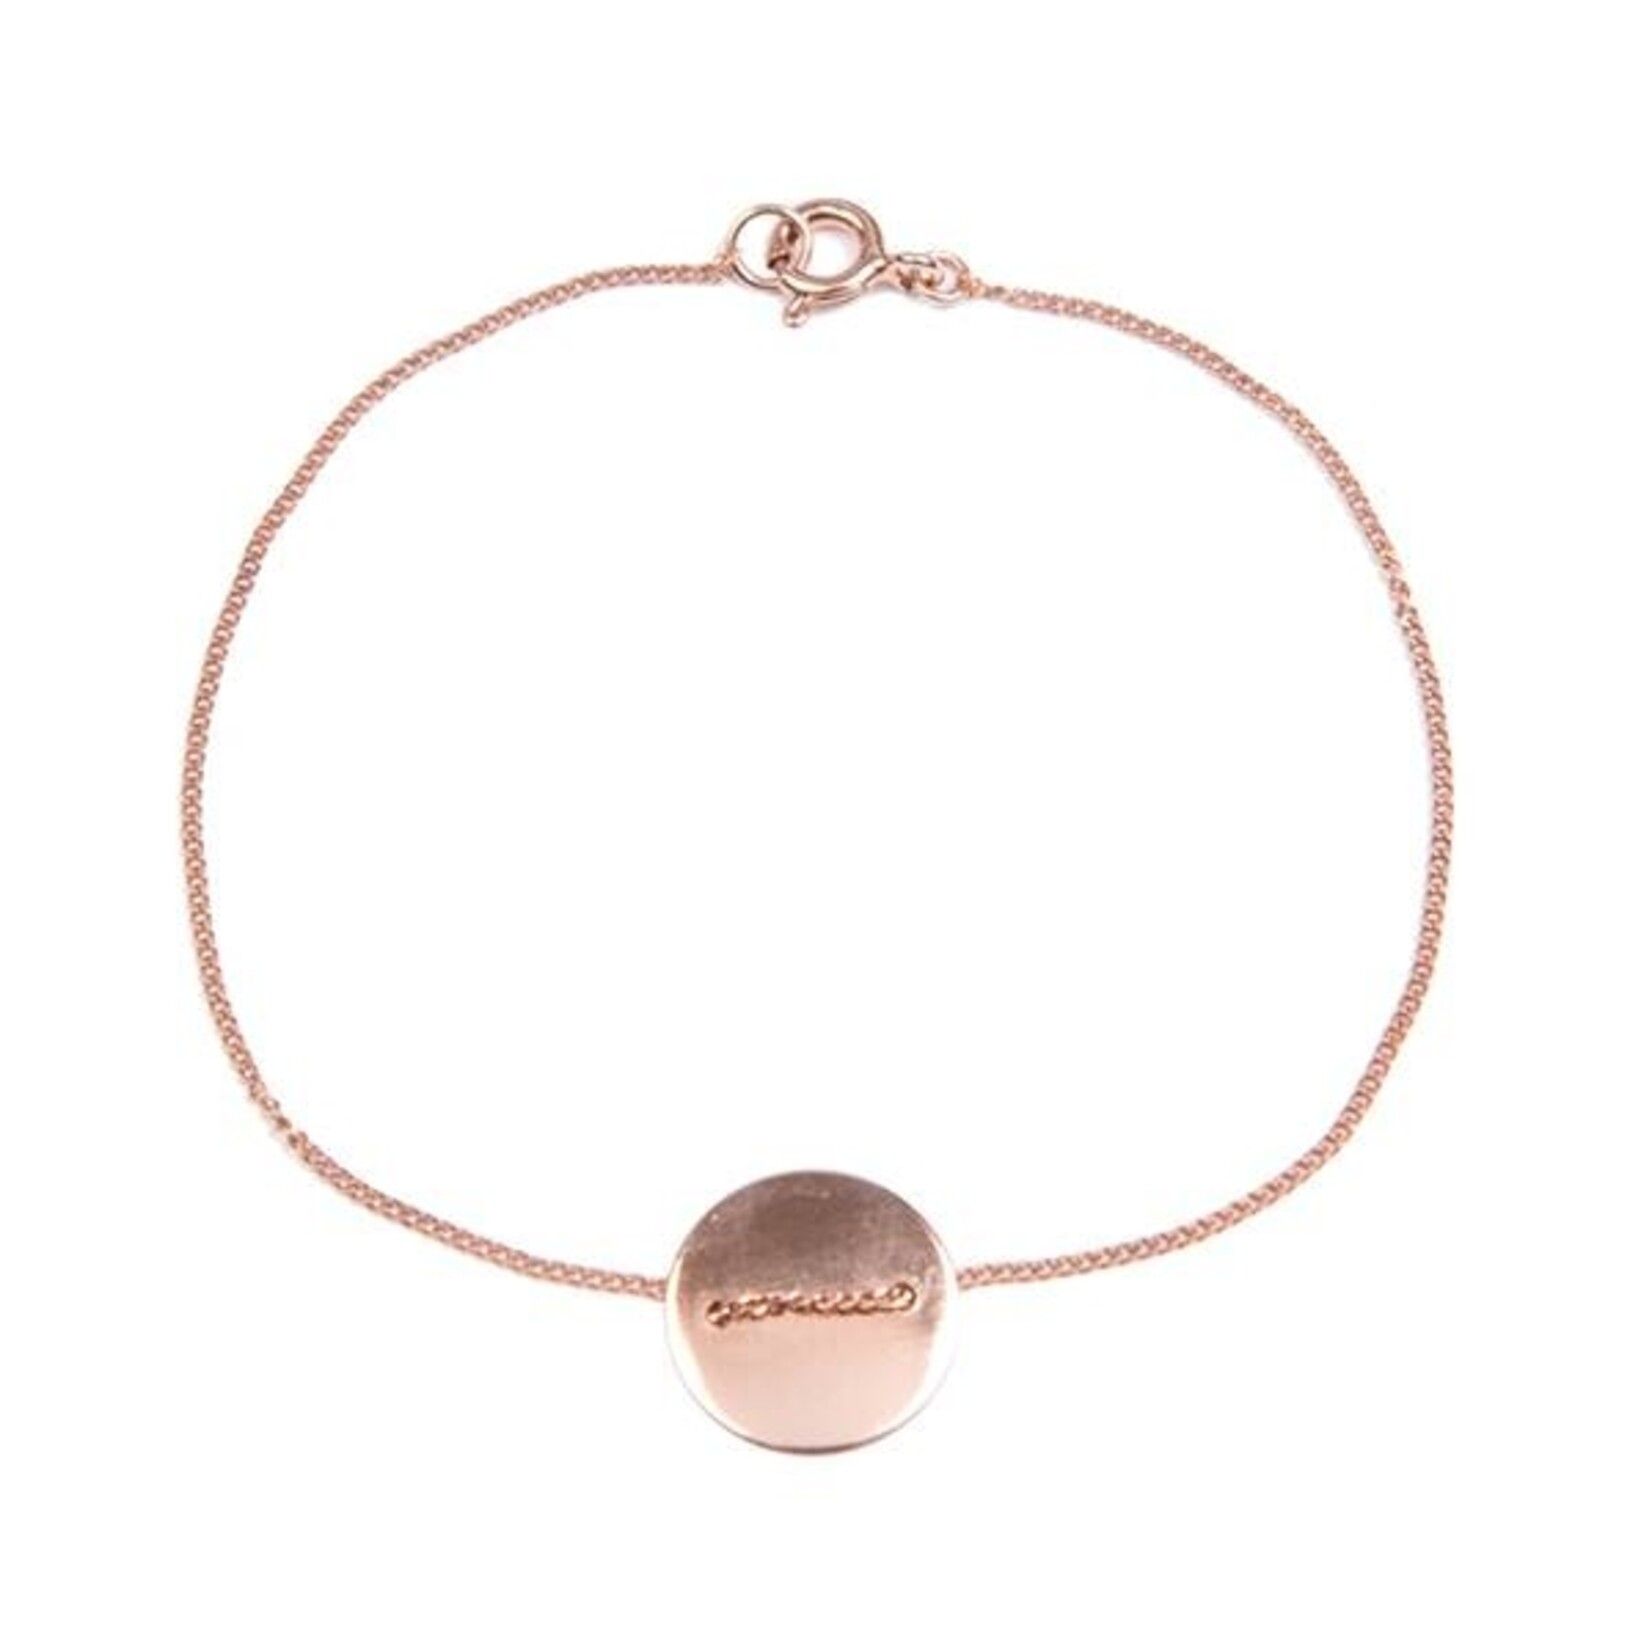 charlotte wooning armband geometry coin - rose